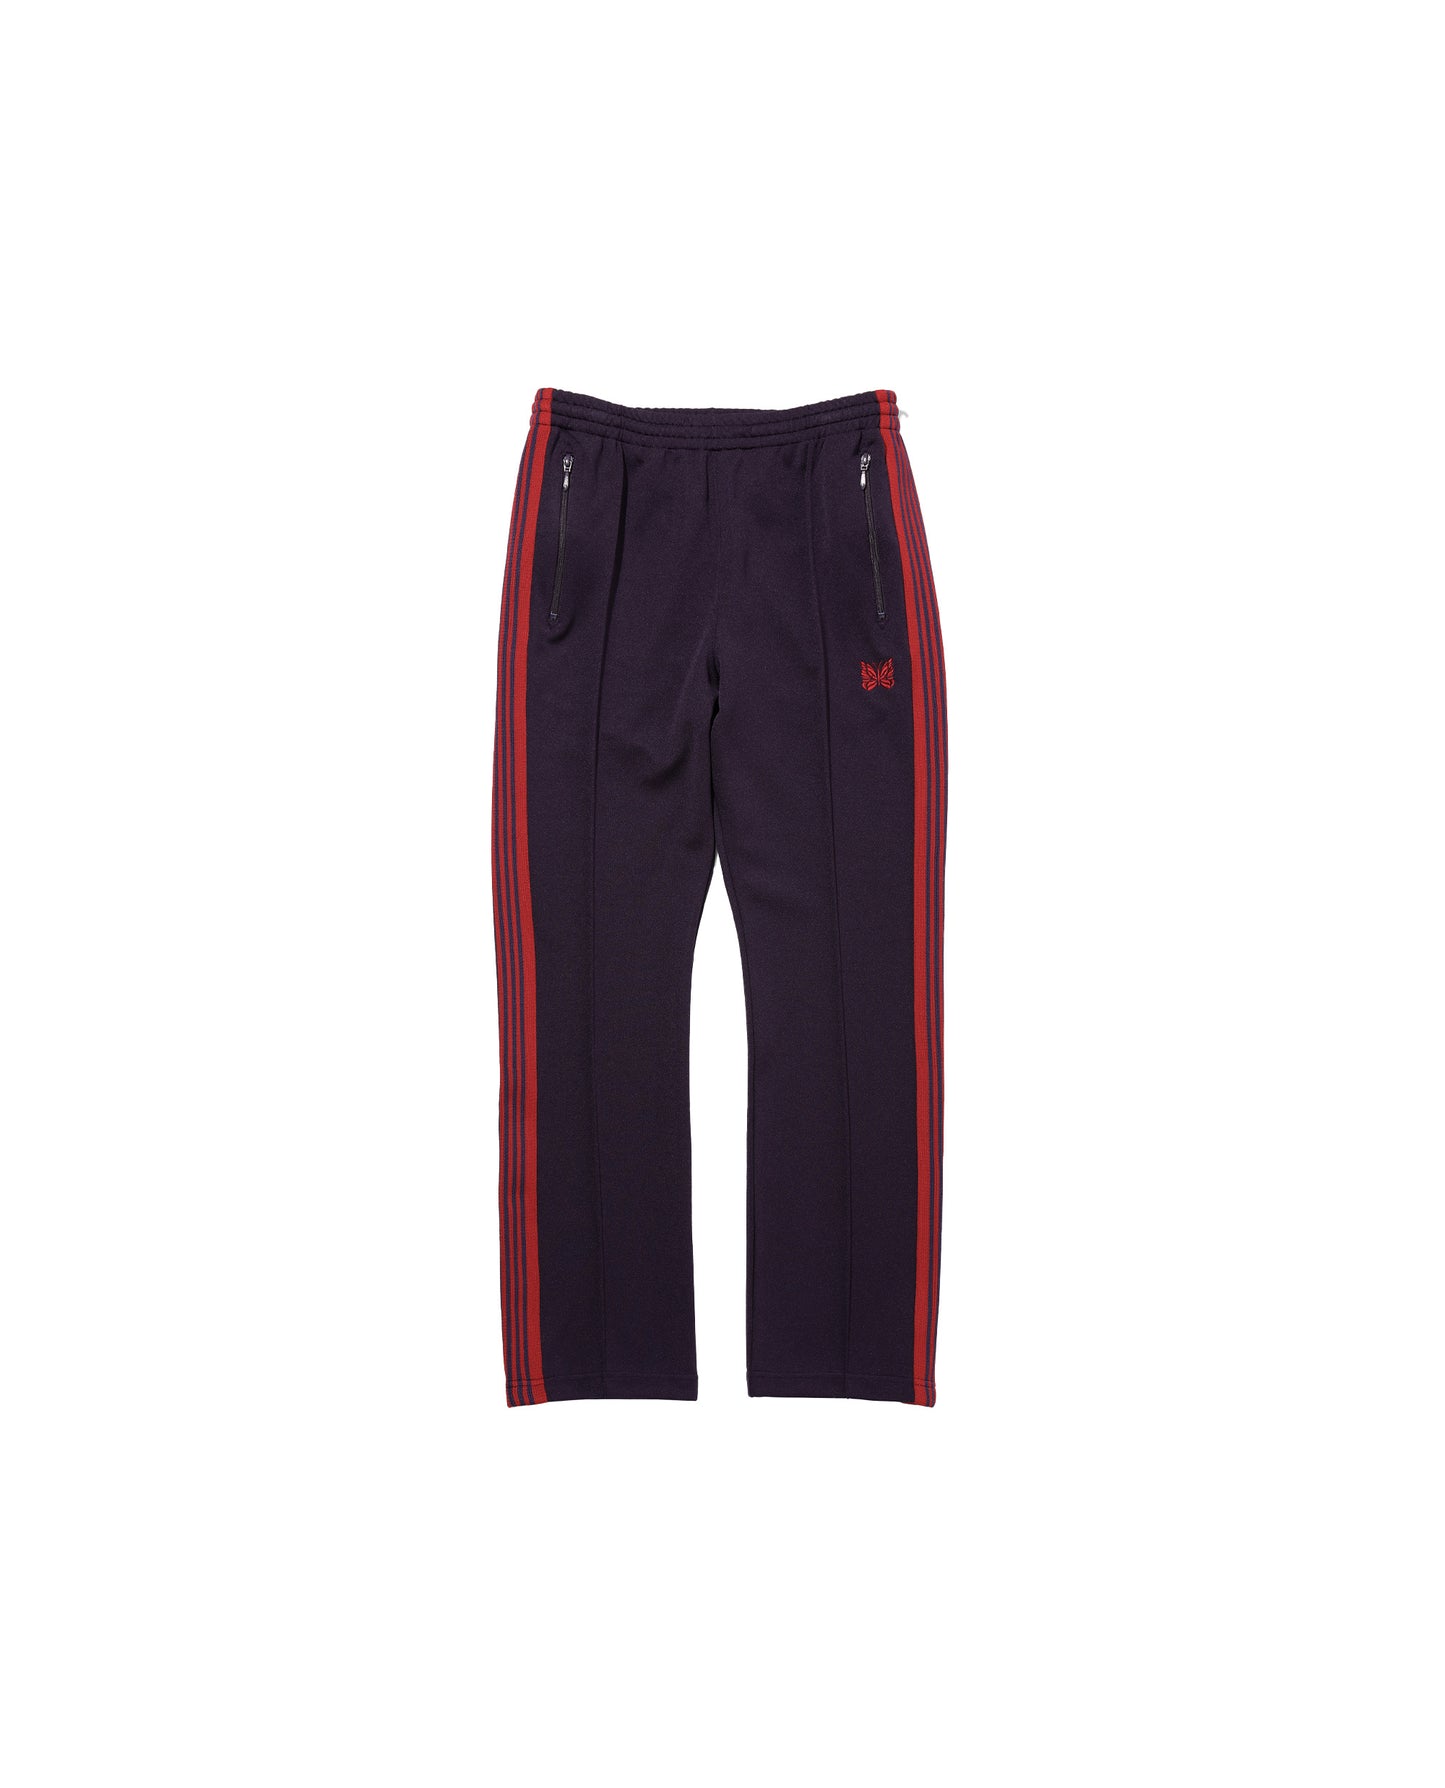 Needles Narrow Track pant poly smooth navy brand new 21AW Nepenthes JO223